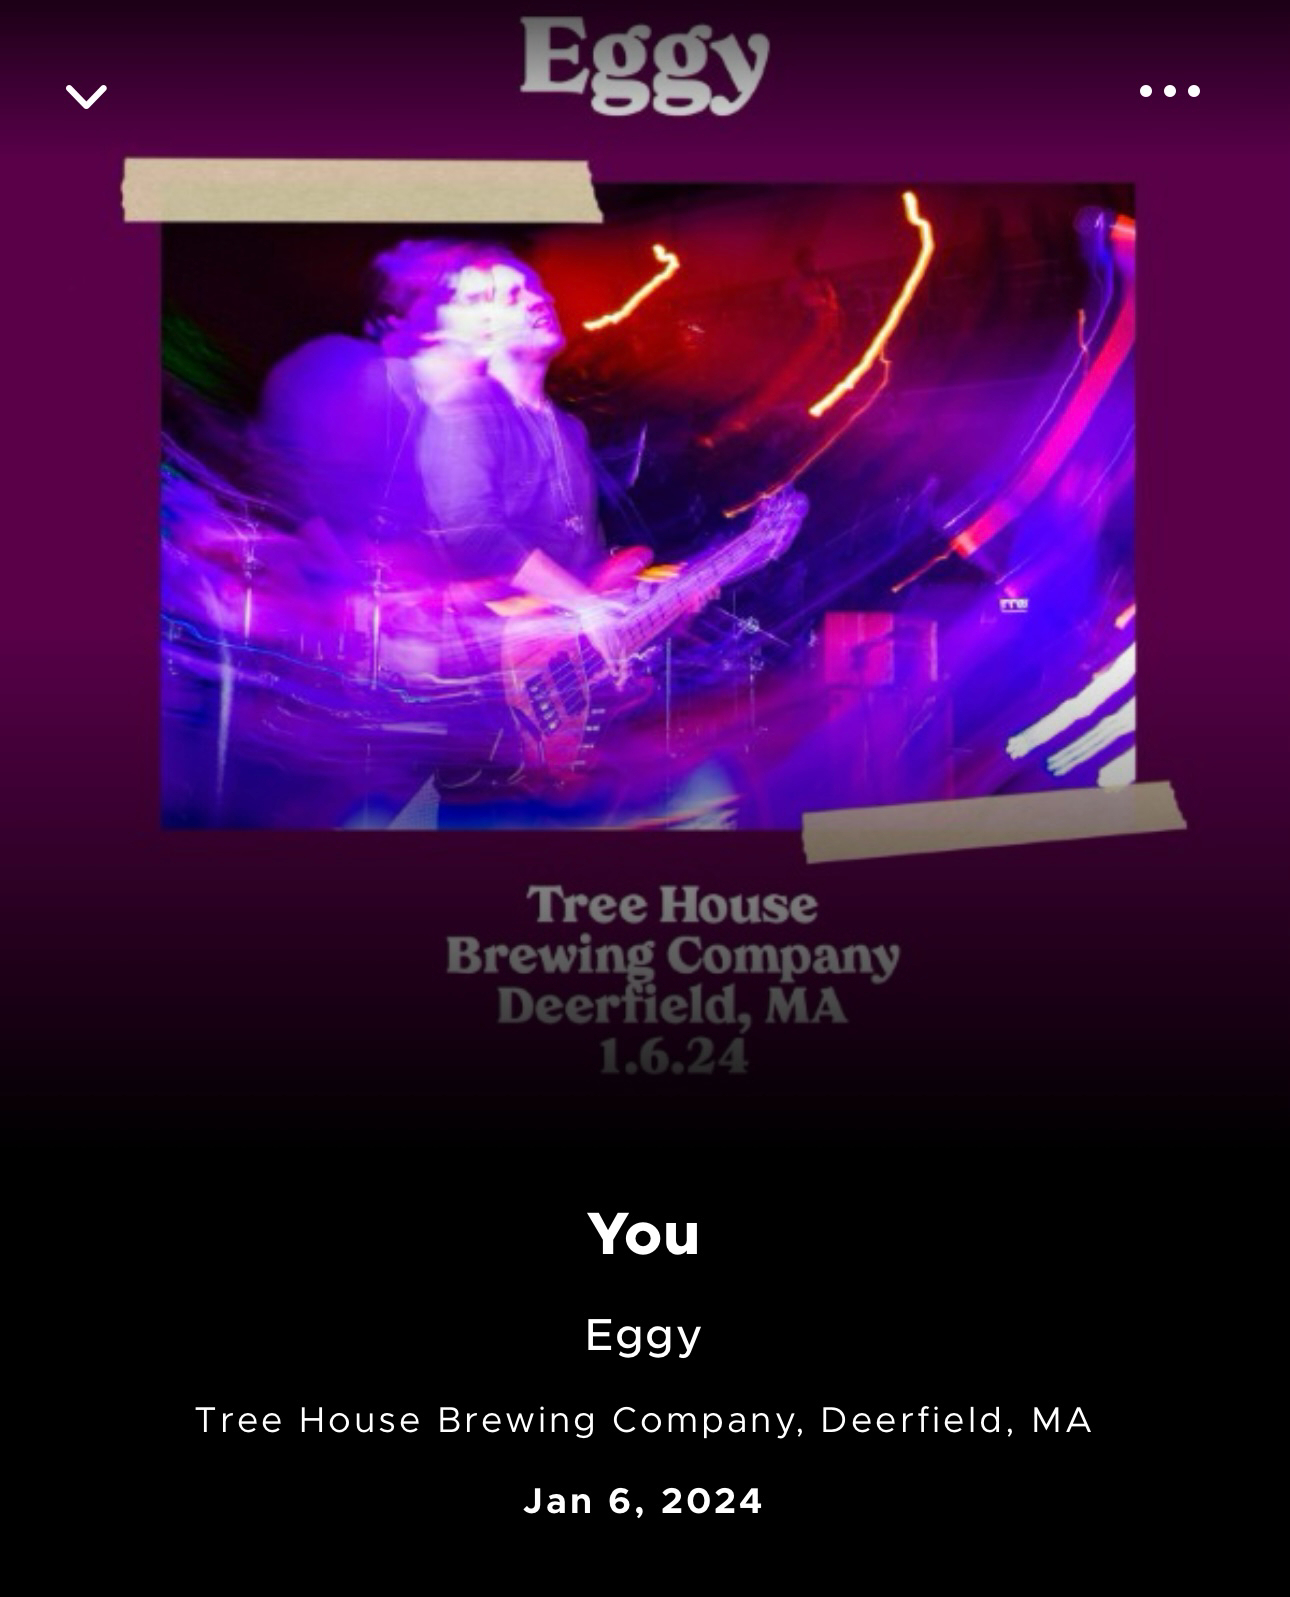 Concert poster with a blurred image of a person playing a bass guitar, purple and blue stage lighting, with text “Eggy” at the top, the name of the artist or band. Additional text reveals the event location “Tree House Brewing